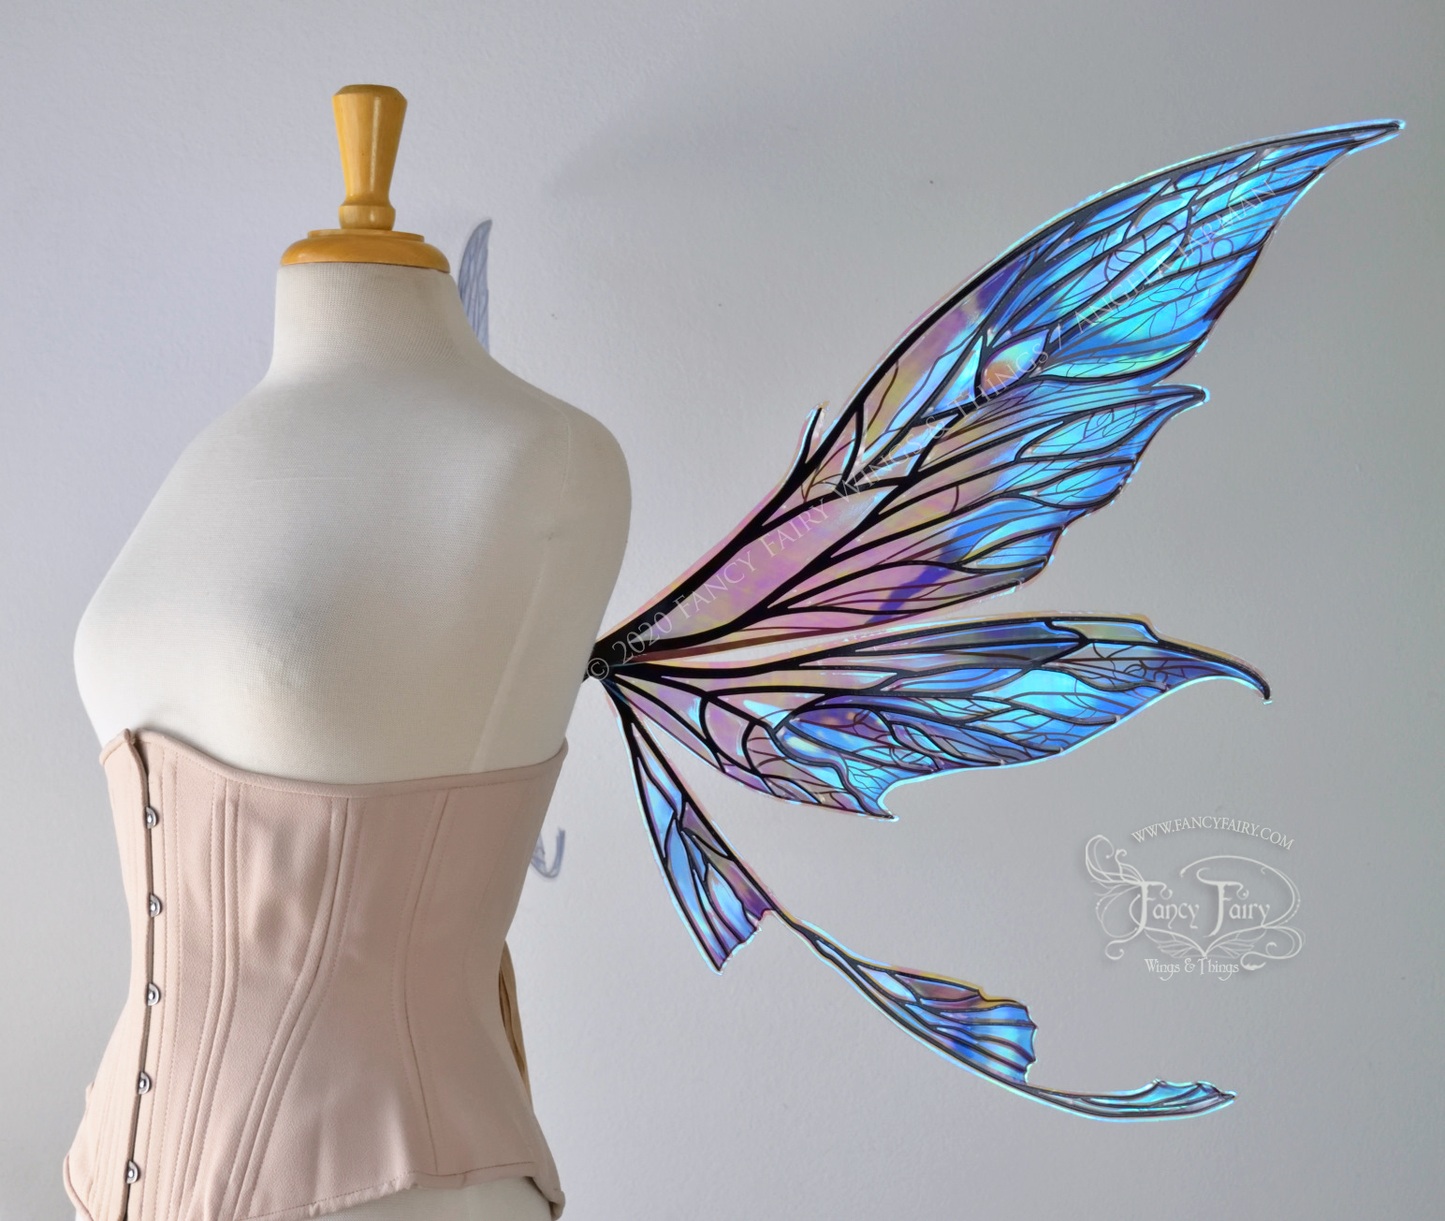 Colette 'Blue Moon' Convertible Iridescent "Pix" Fairy Wings with Black Veins